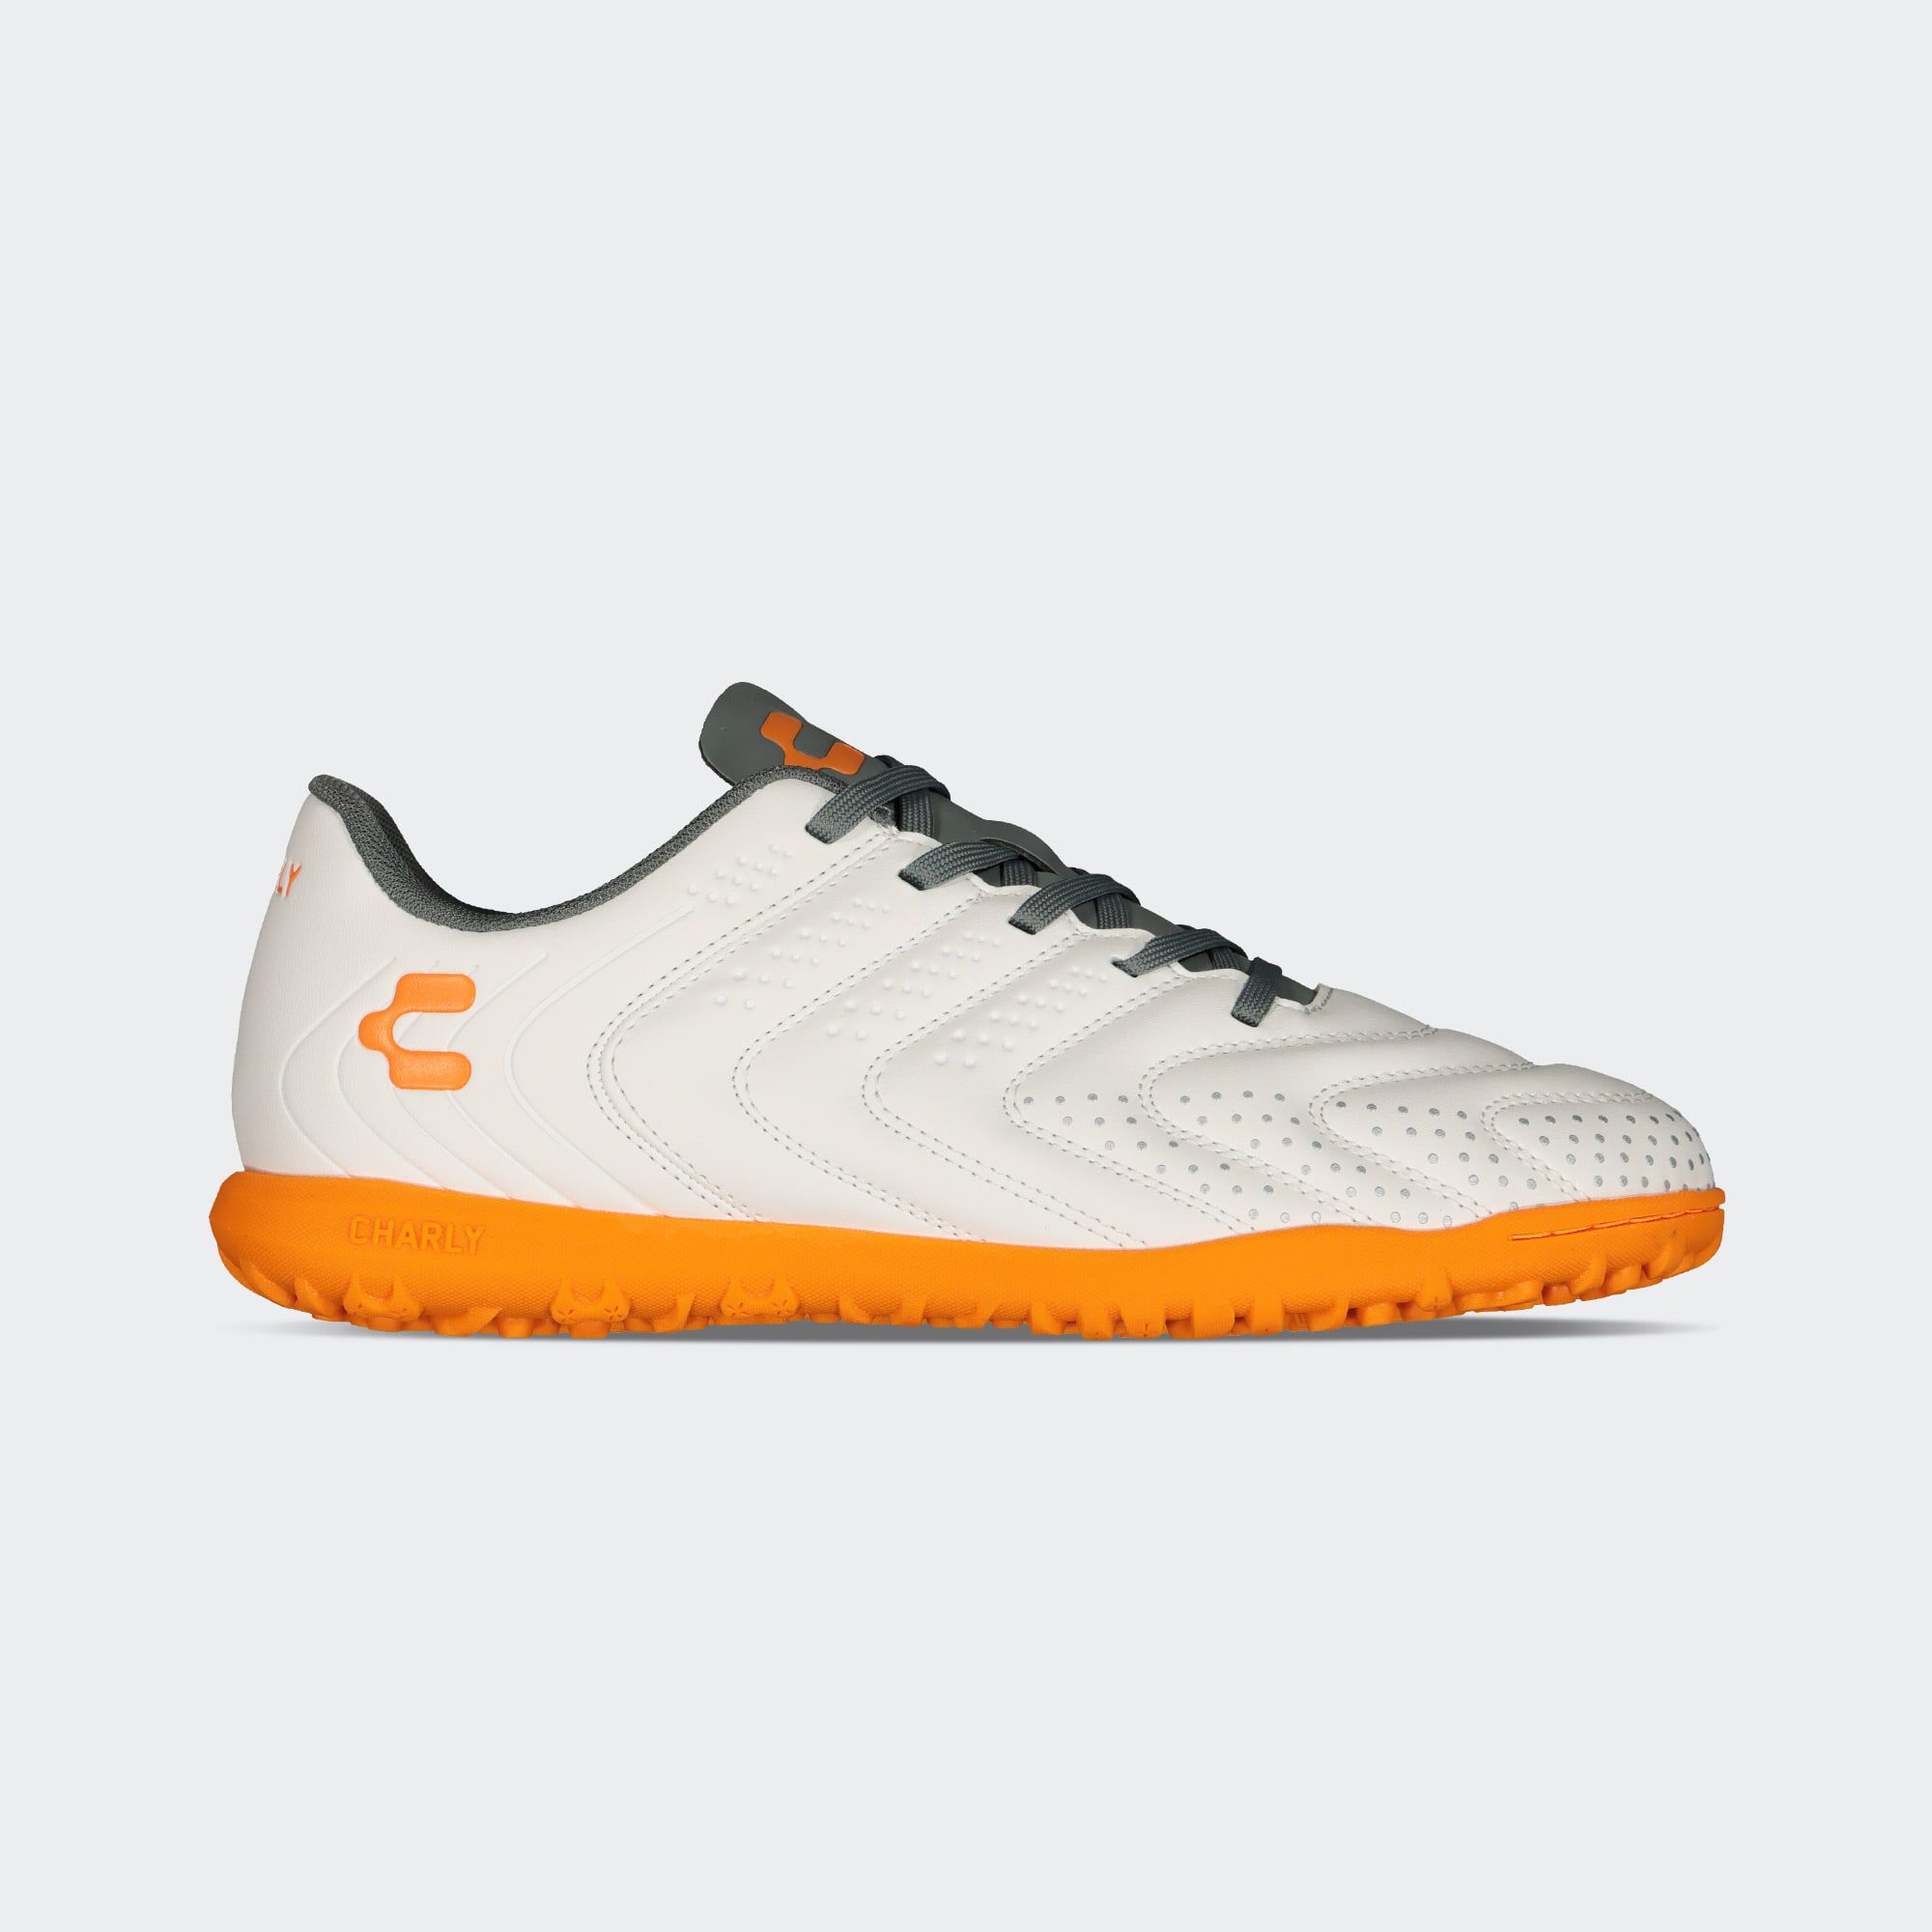 Stefans Soccer - Wisconsin - Charly Encore Turf Shoes - White / Orange